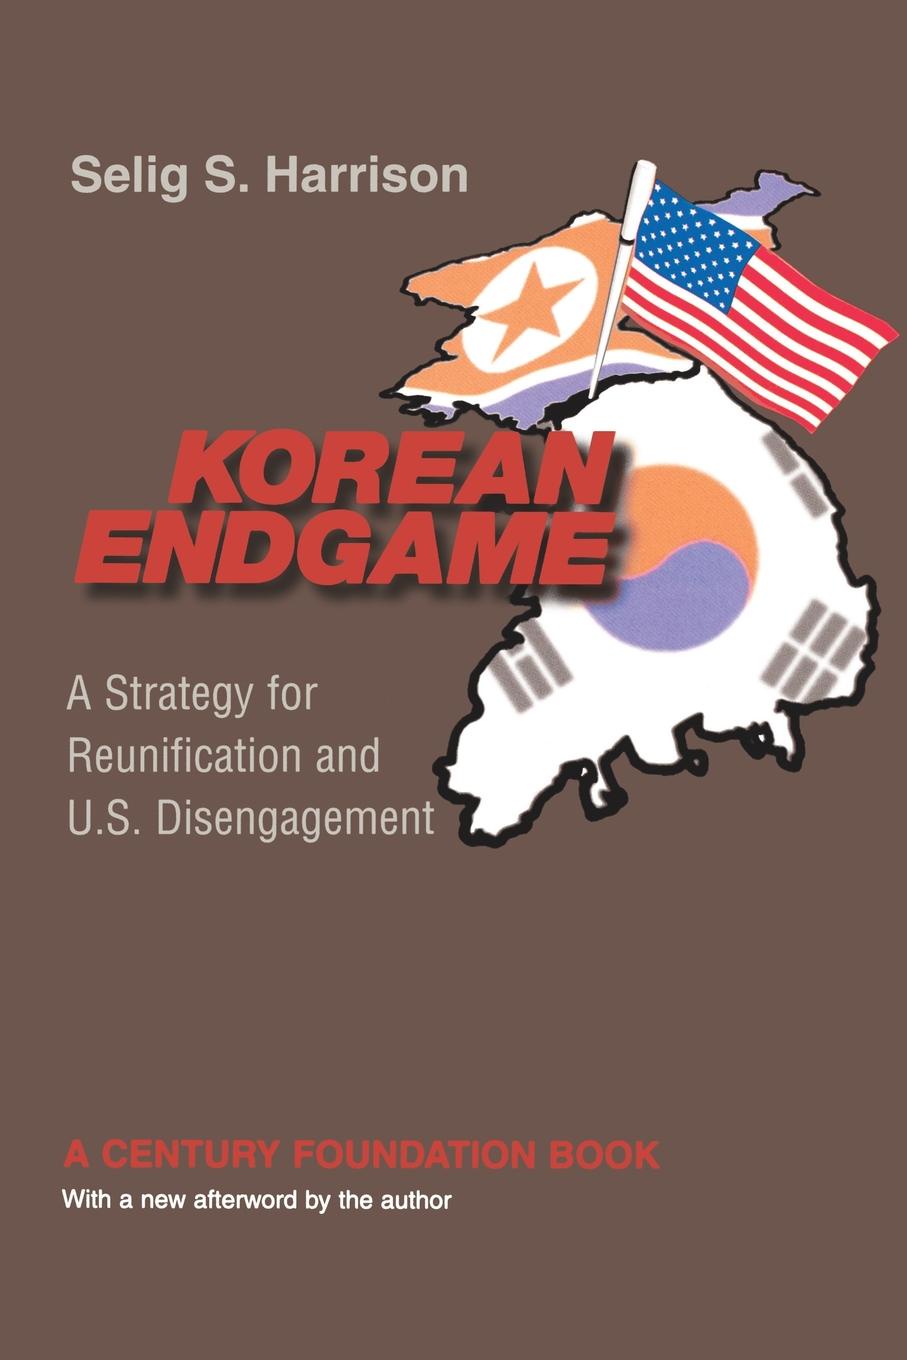 Korean Endgame. A Strategy for Reunification and U.S. Disengagement